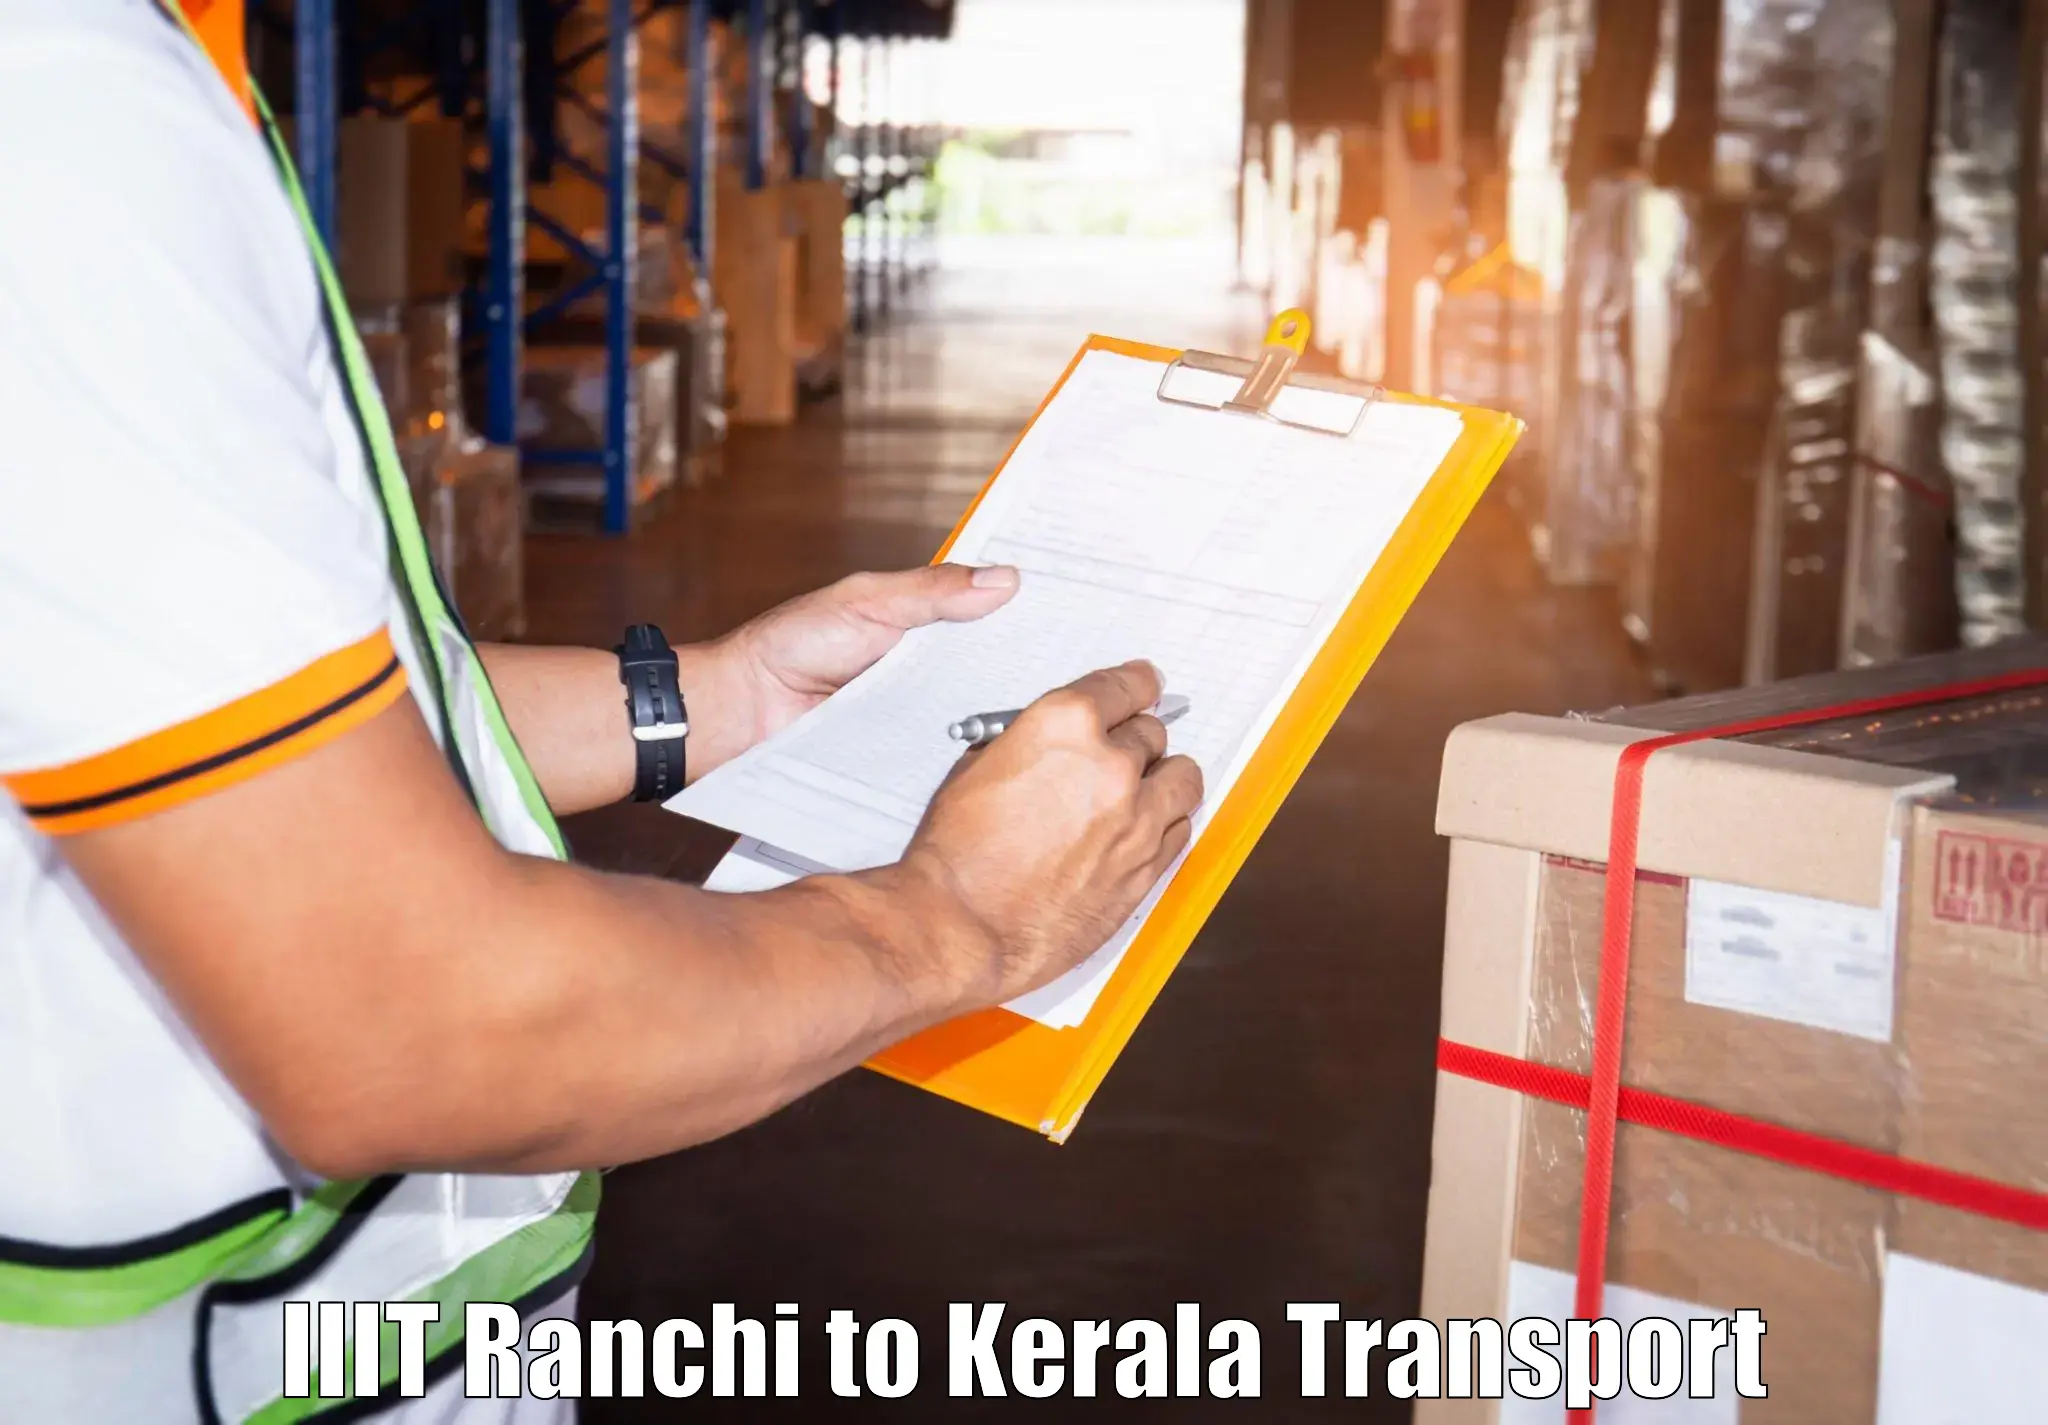 Express transport services IIIT Ranchi to Allepey